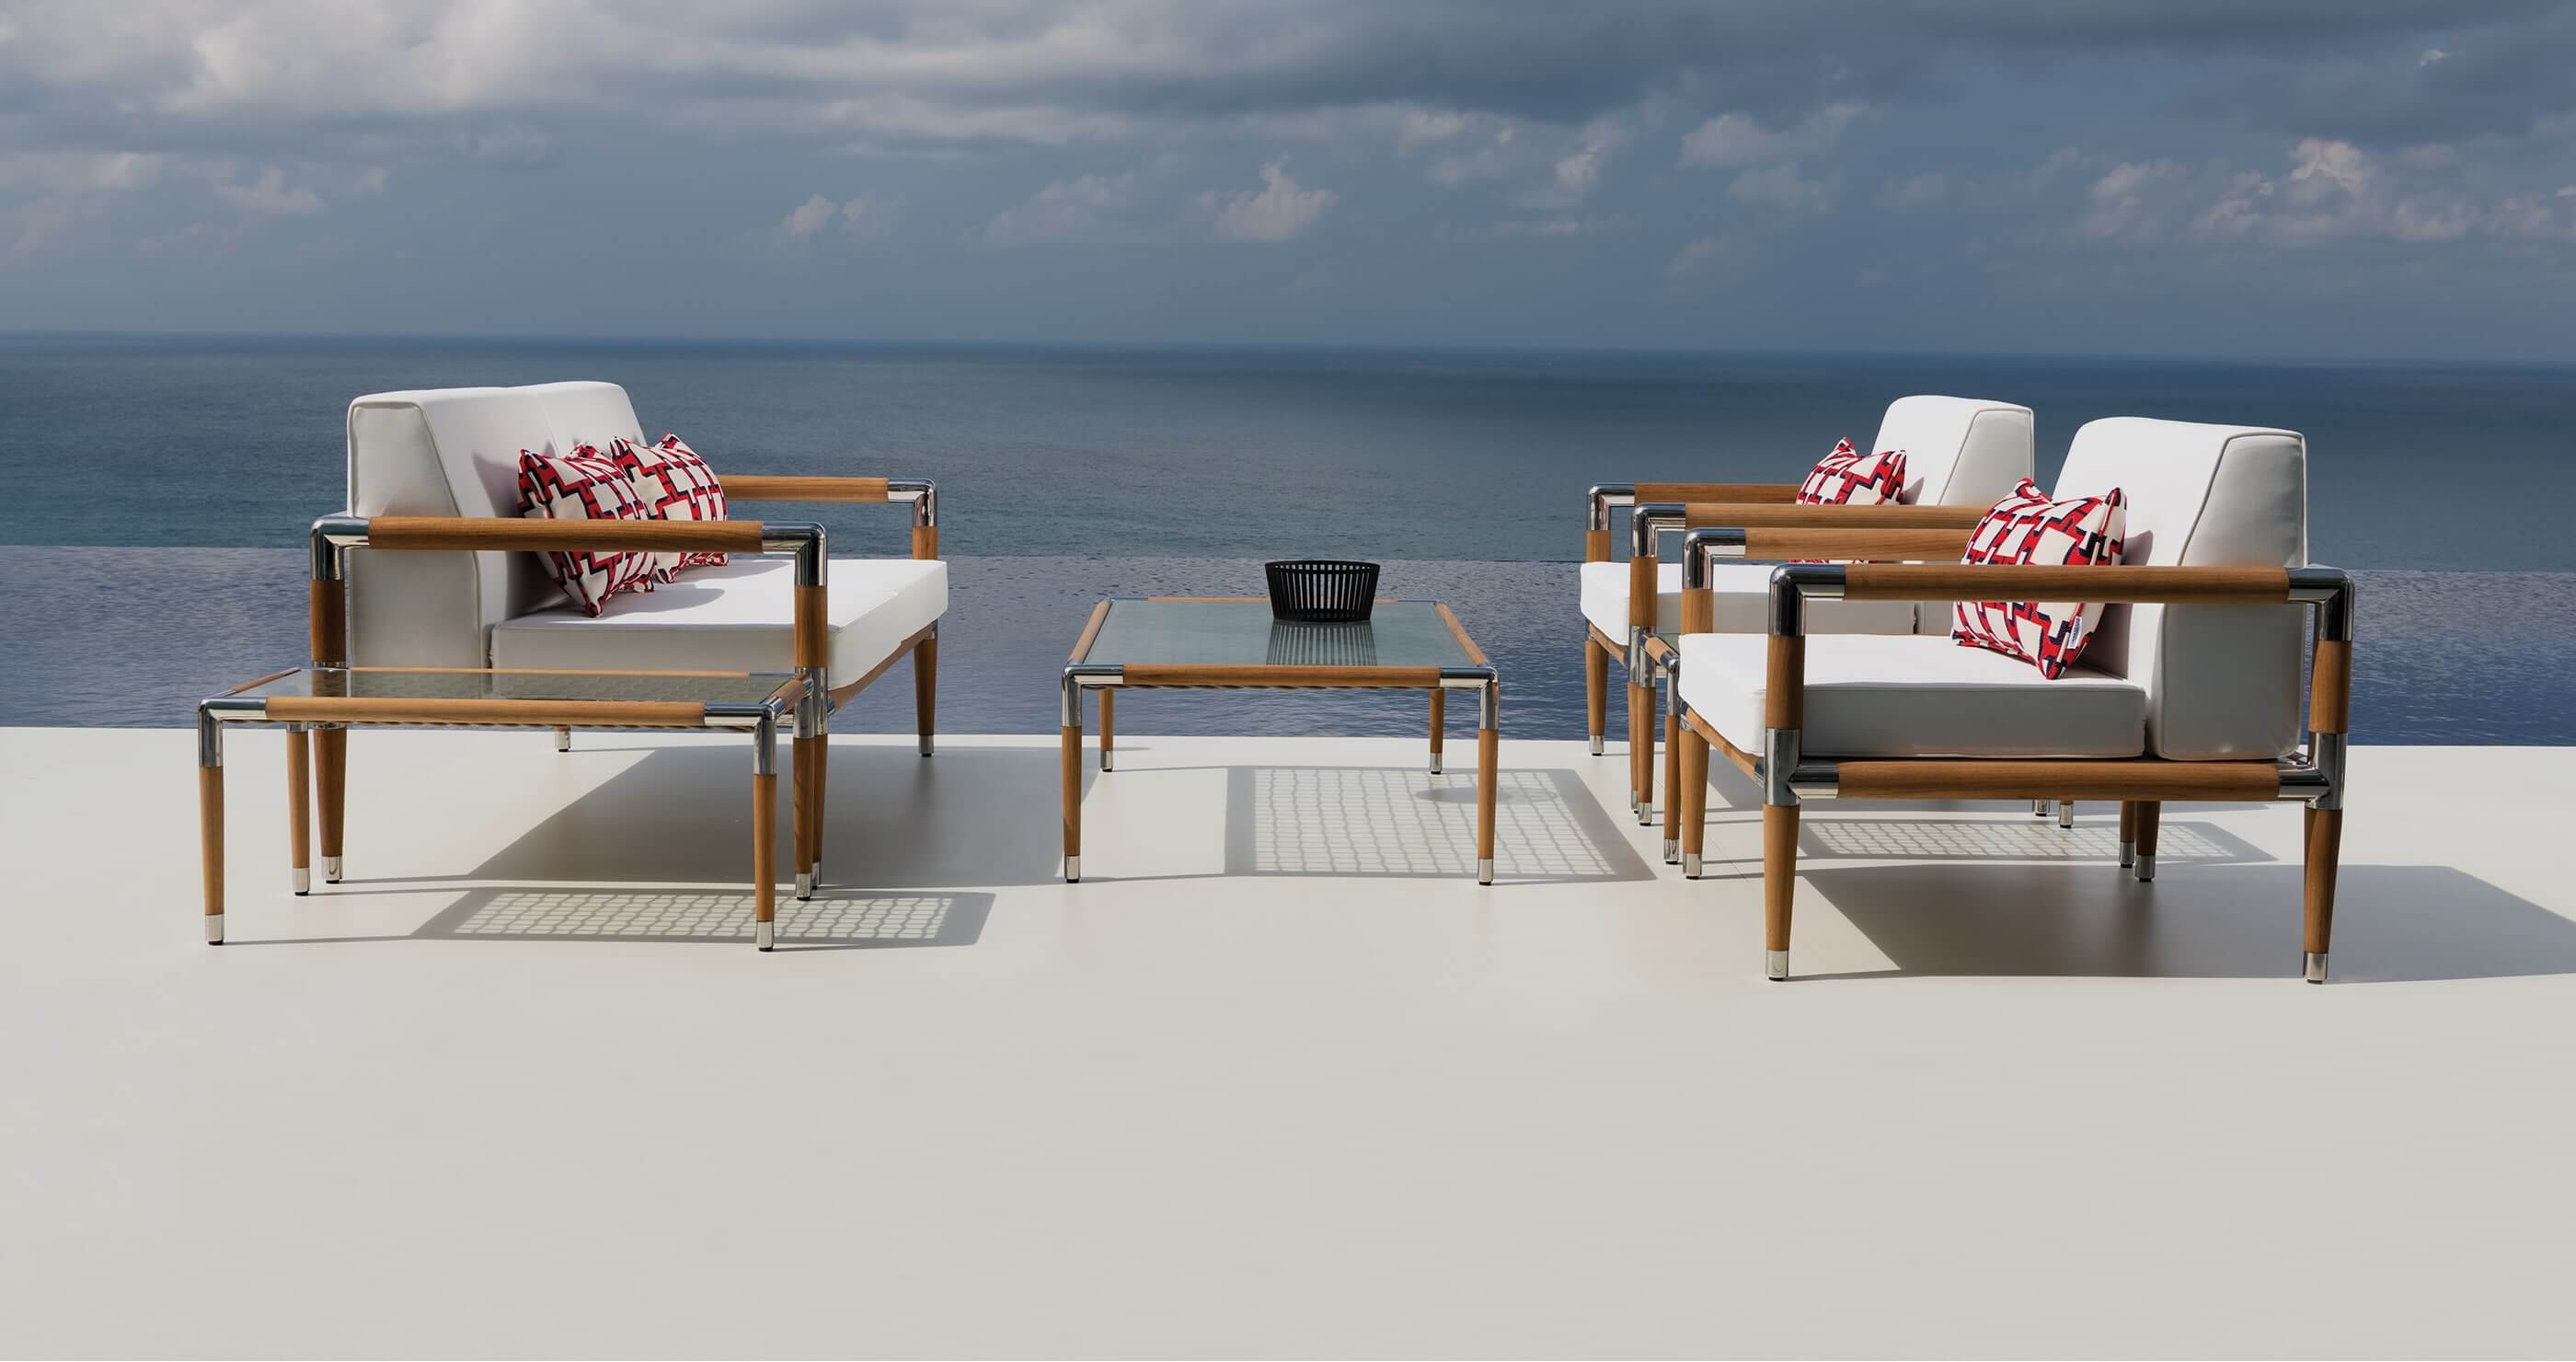 Indian Ocean furniture: luxury outdoor coffee table and chairs with the ocean in the background